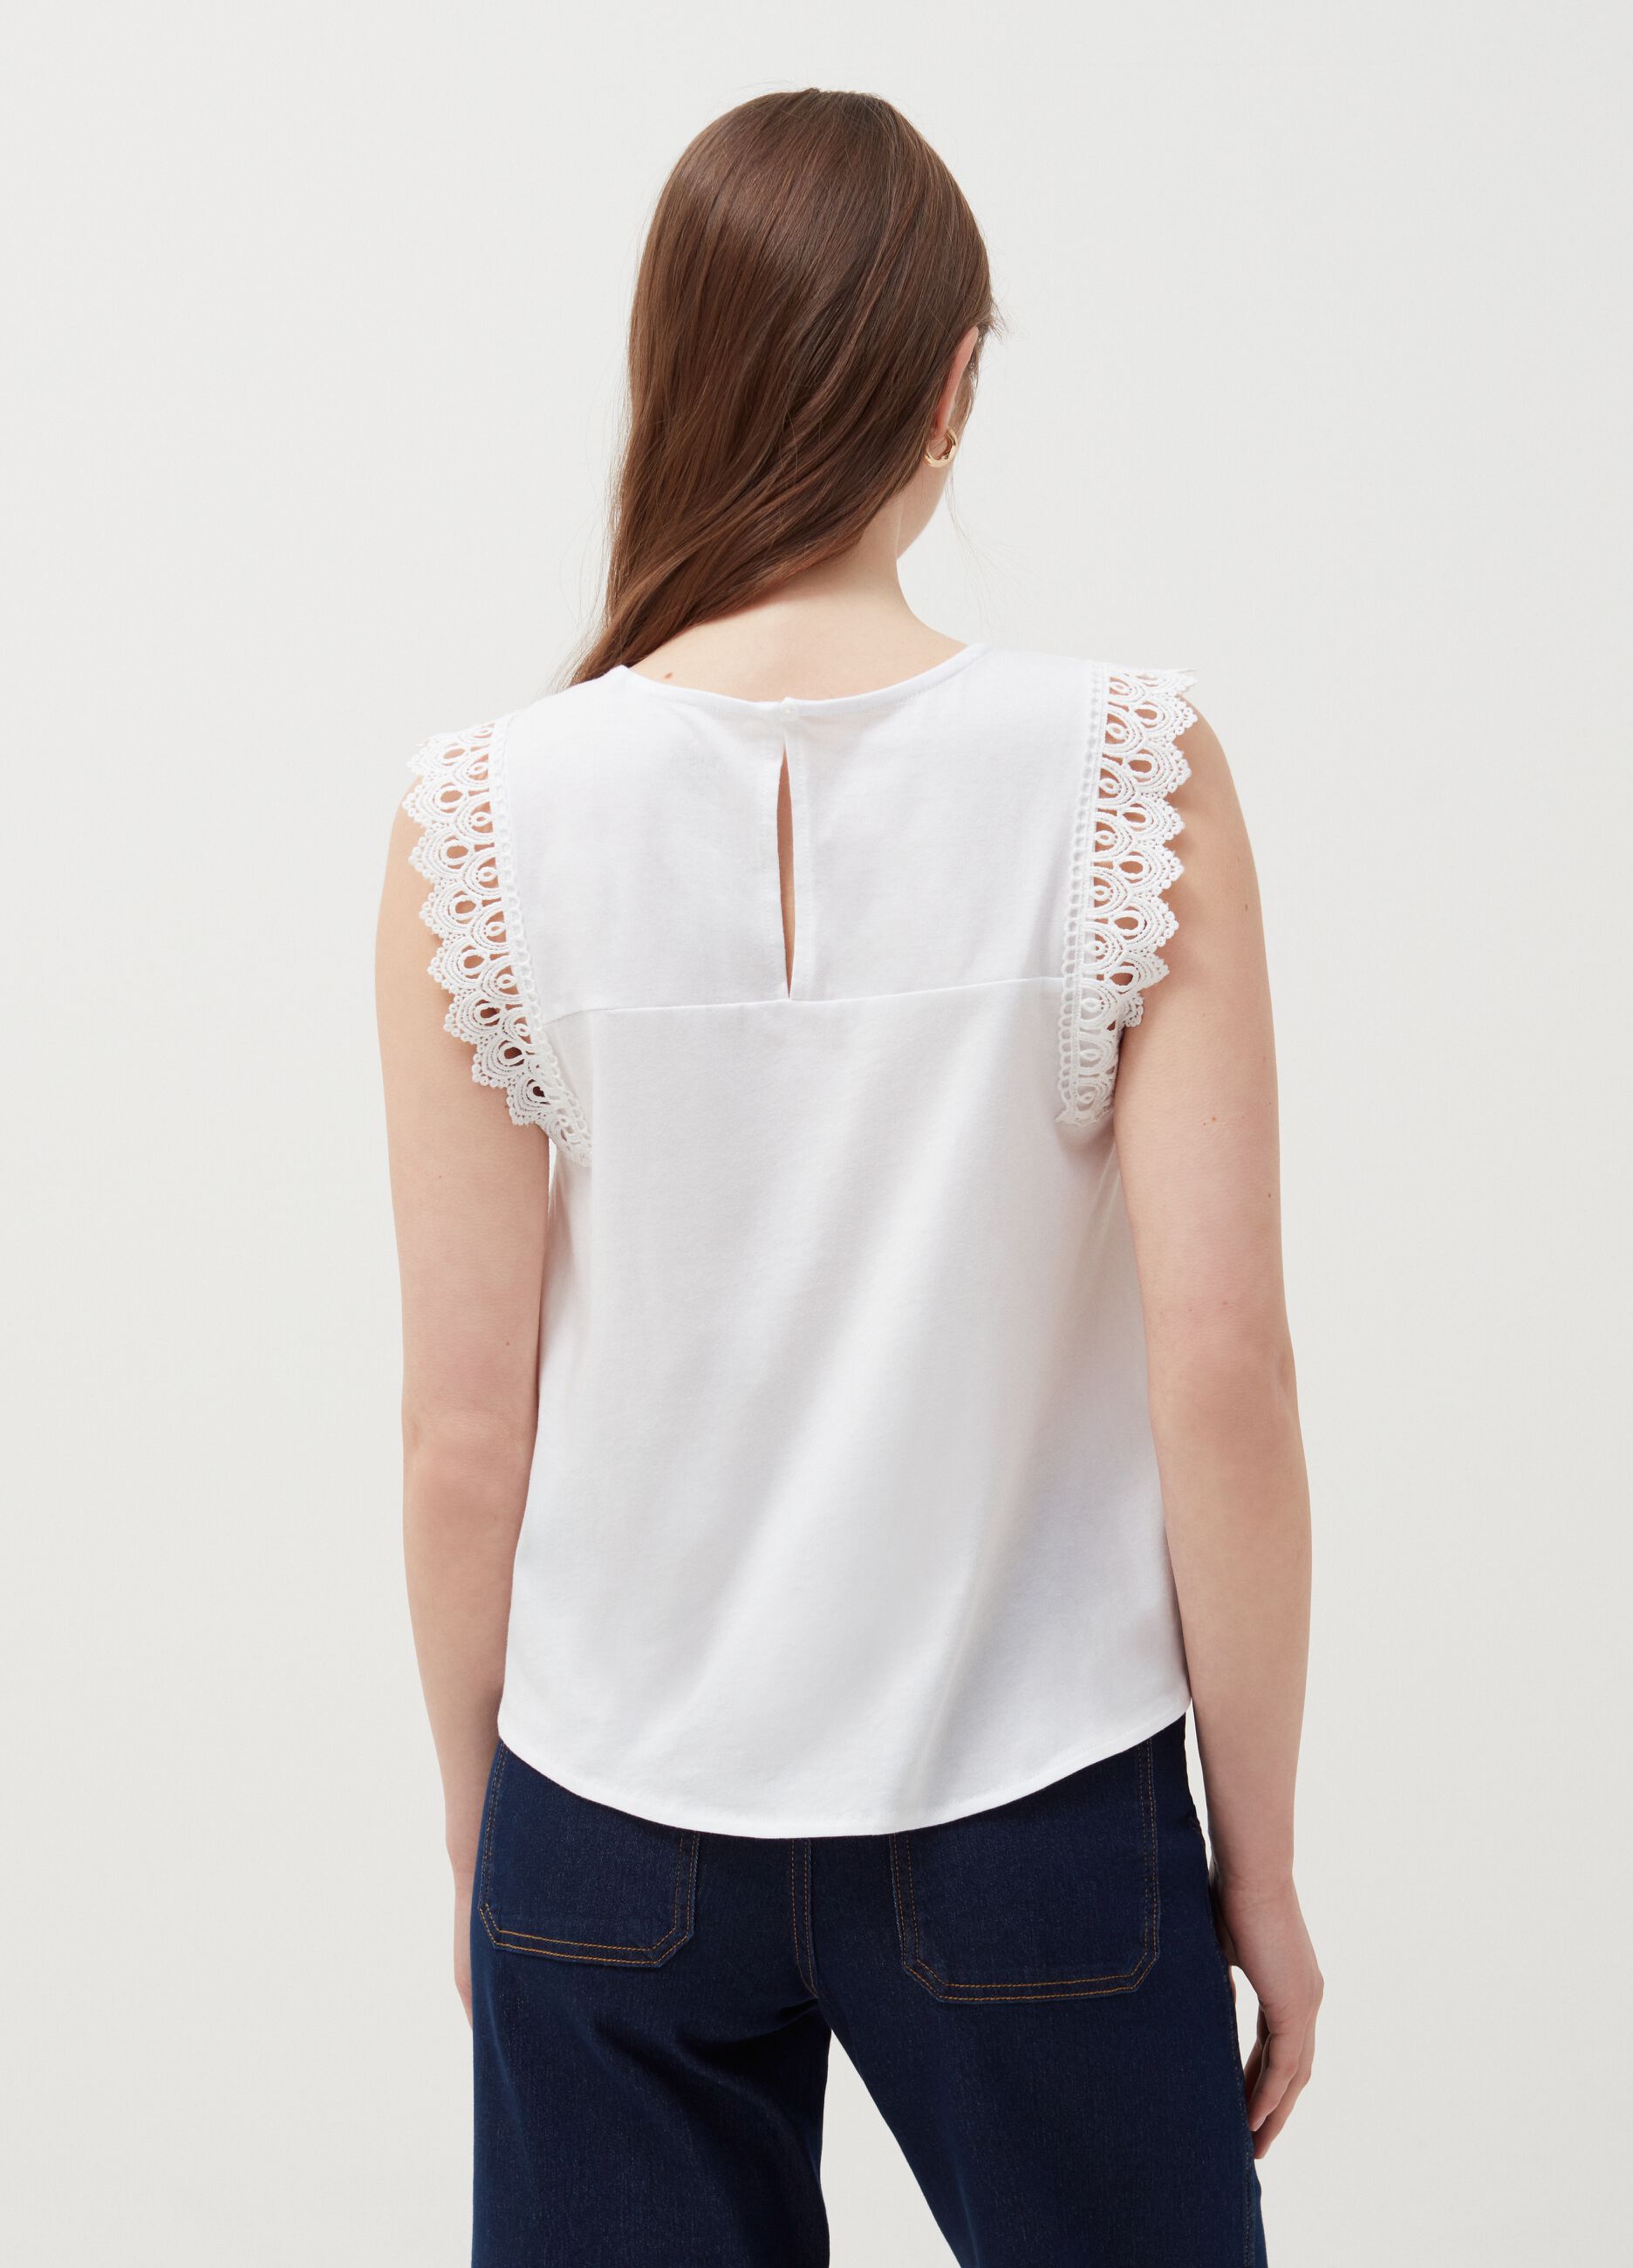 Broderie anglaise tank top with round neck